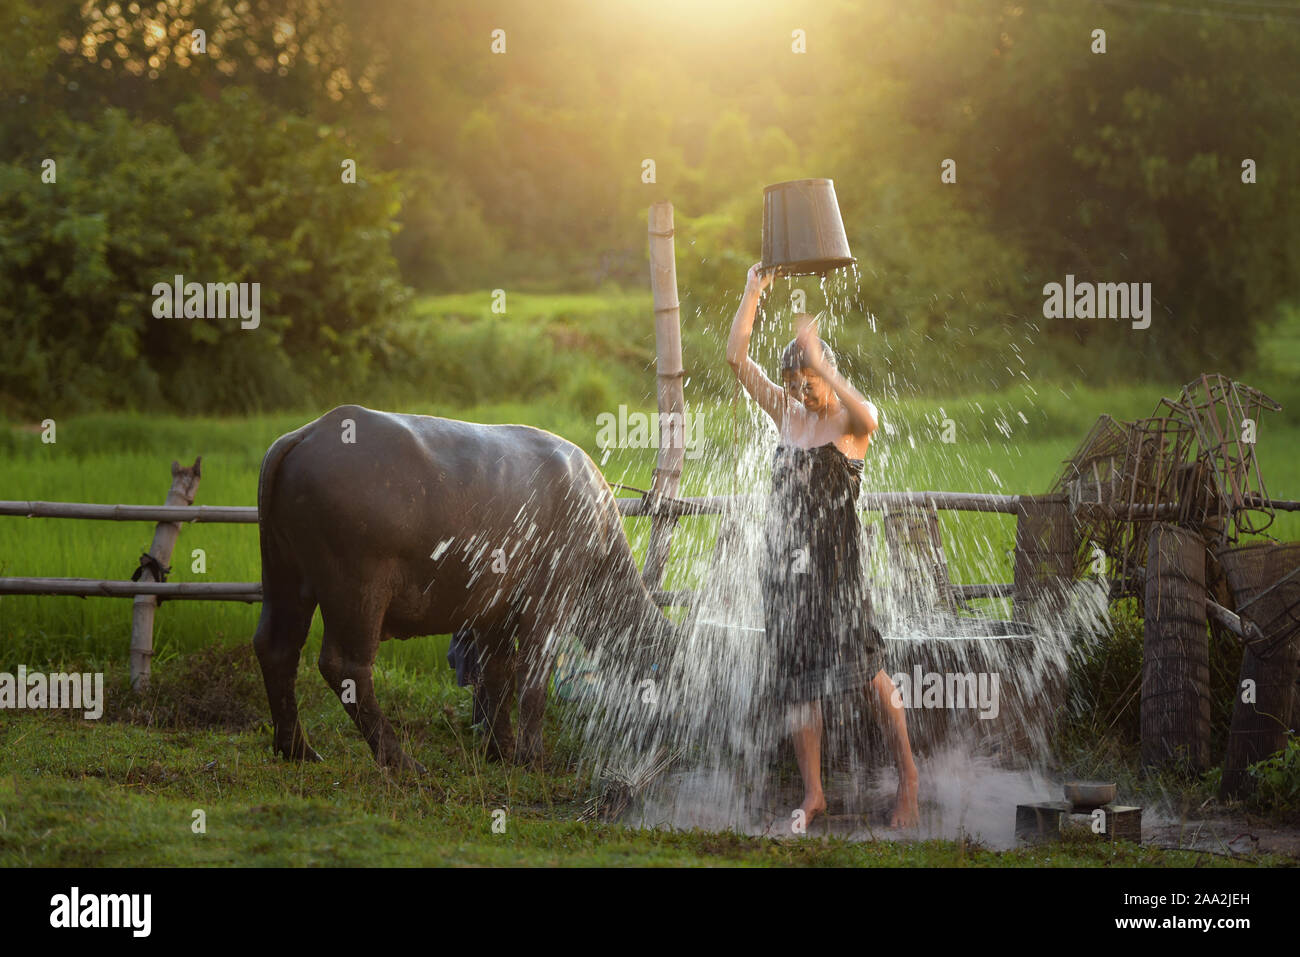 Woman standing in a field pouring a bucket of water over her head, Thailand Stock Photo